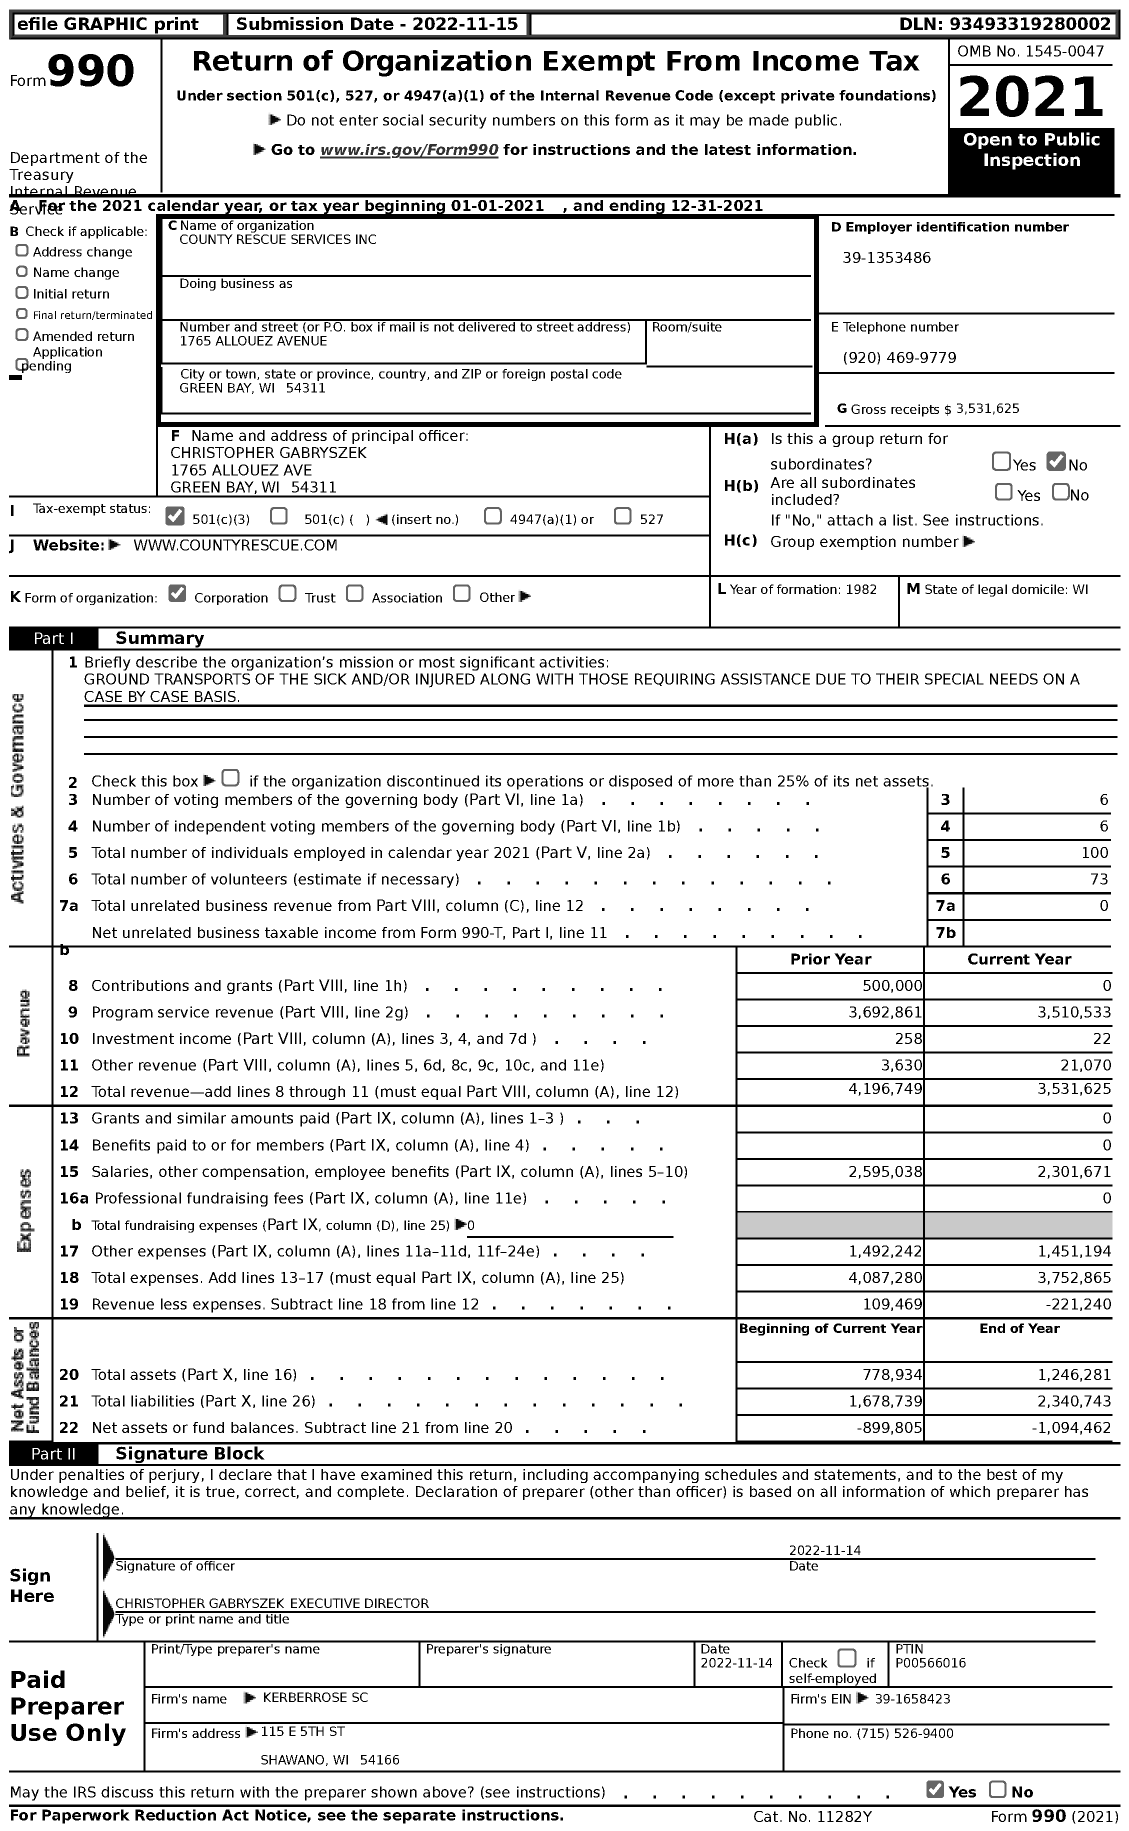 Image of first page of 2021 Form 990 for County Rescue Services